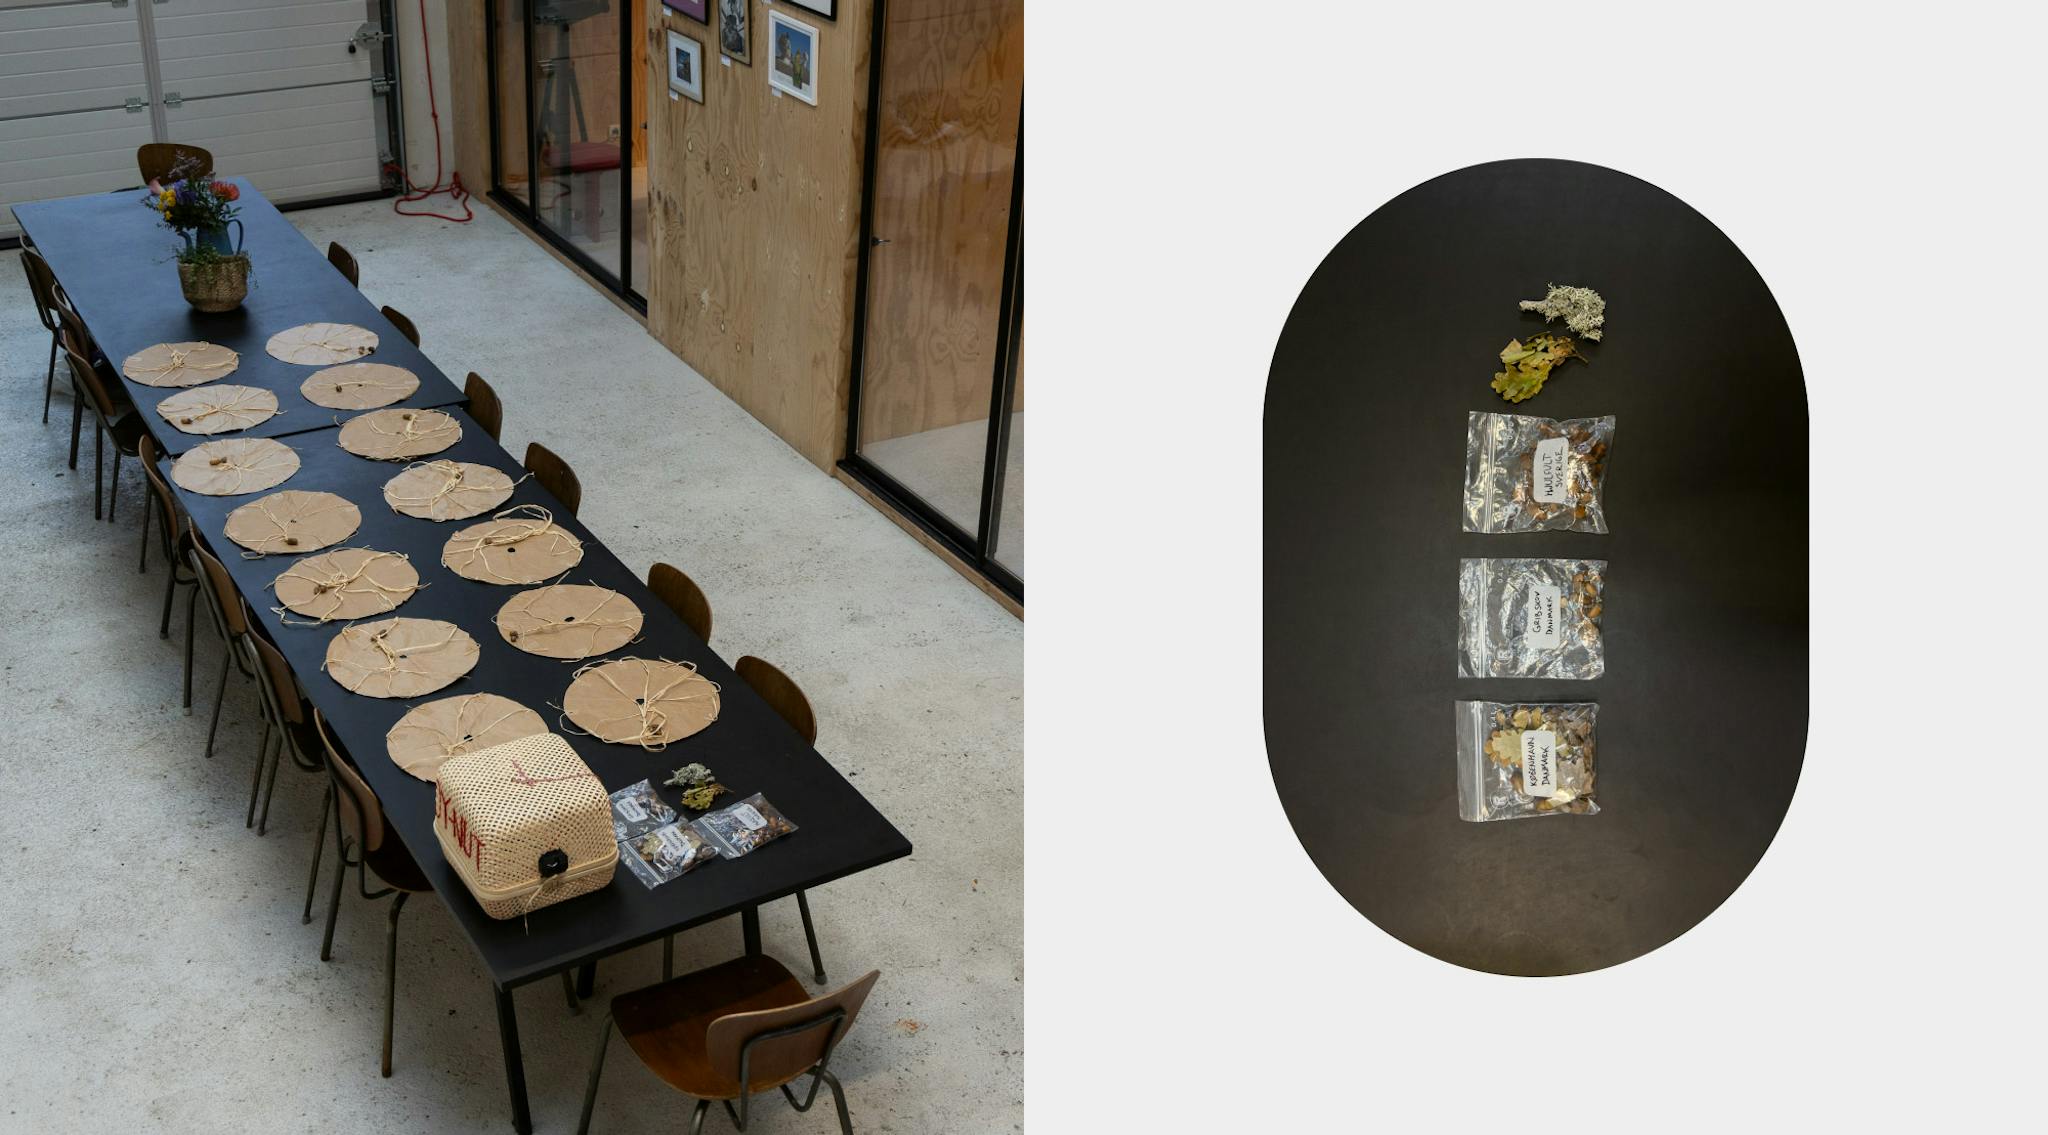 Two images: on the left is a table with hand made parachutes laid out and small plastic bags. The same three bags are featured on the right image closeup. 